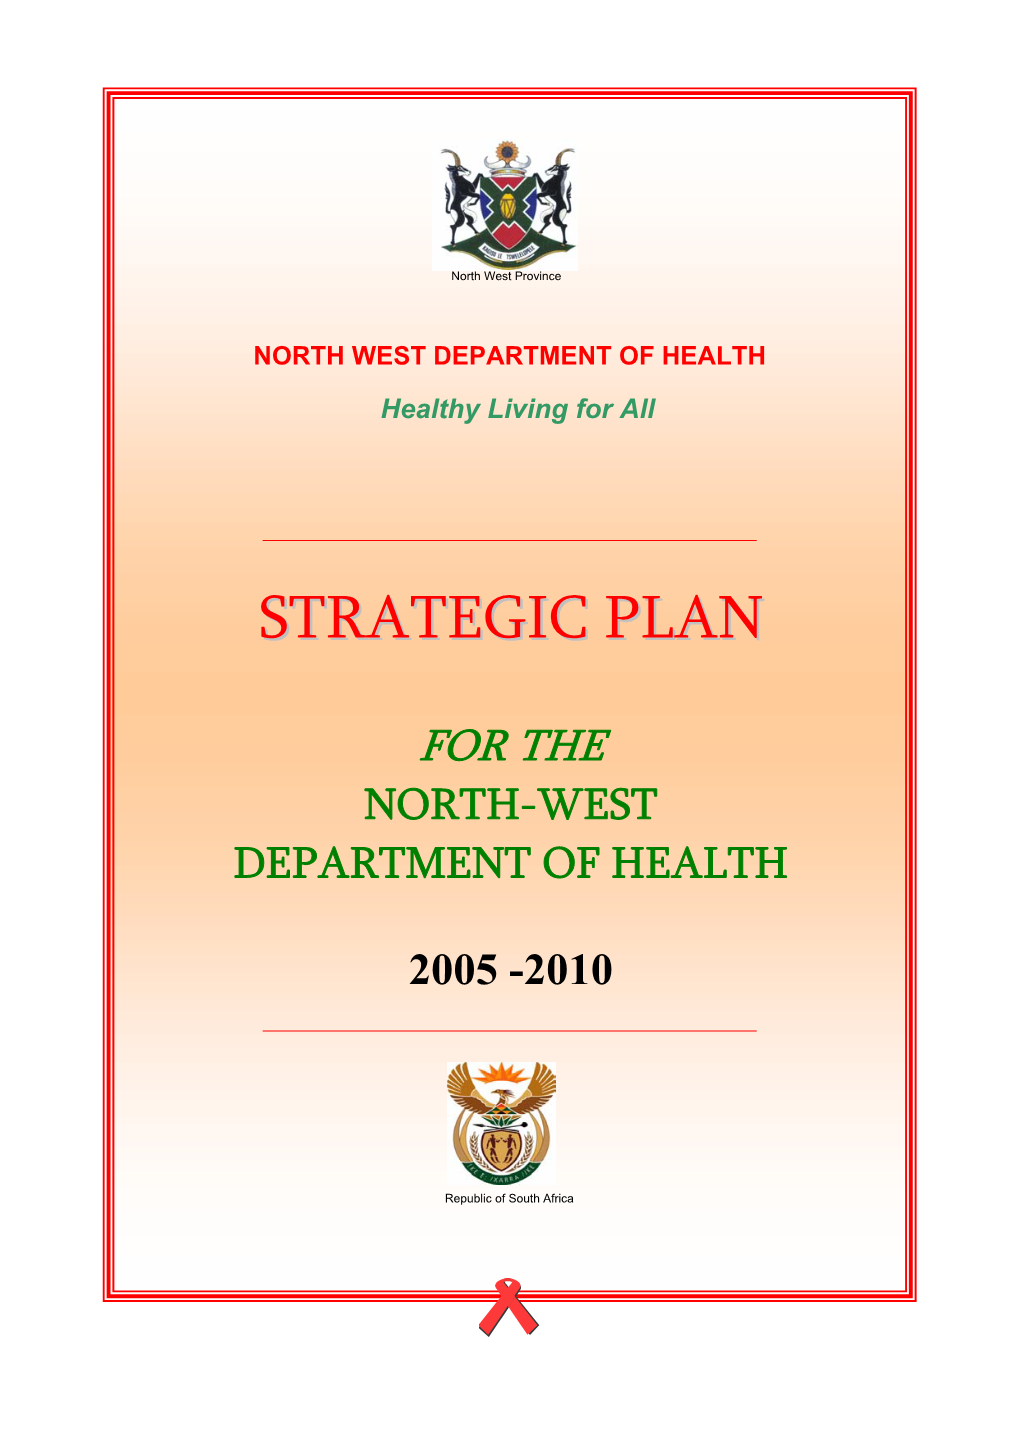 Strategic Plan for the North West Provincial Department of Health (Nwdoh) for the Period 2005/06 to 2008/09 Financial Year